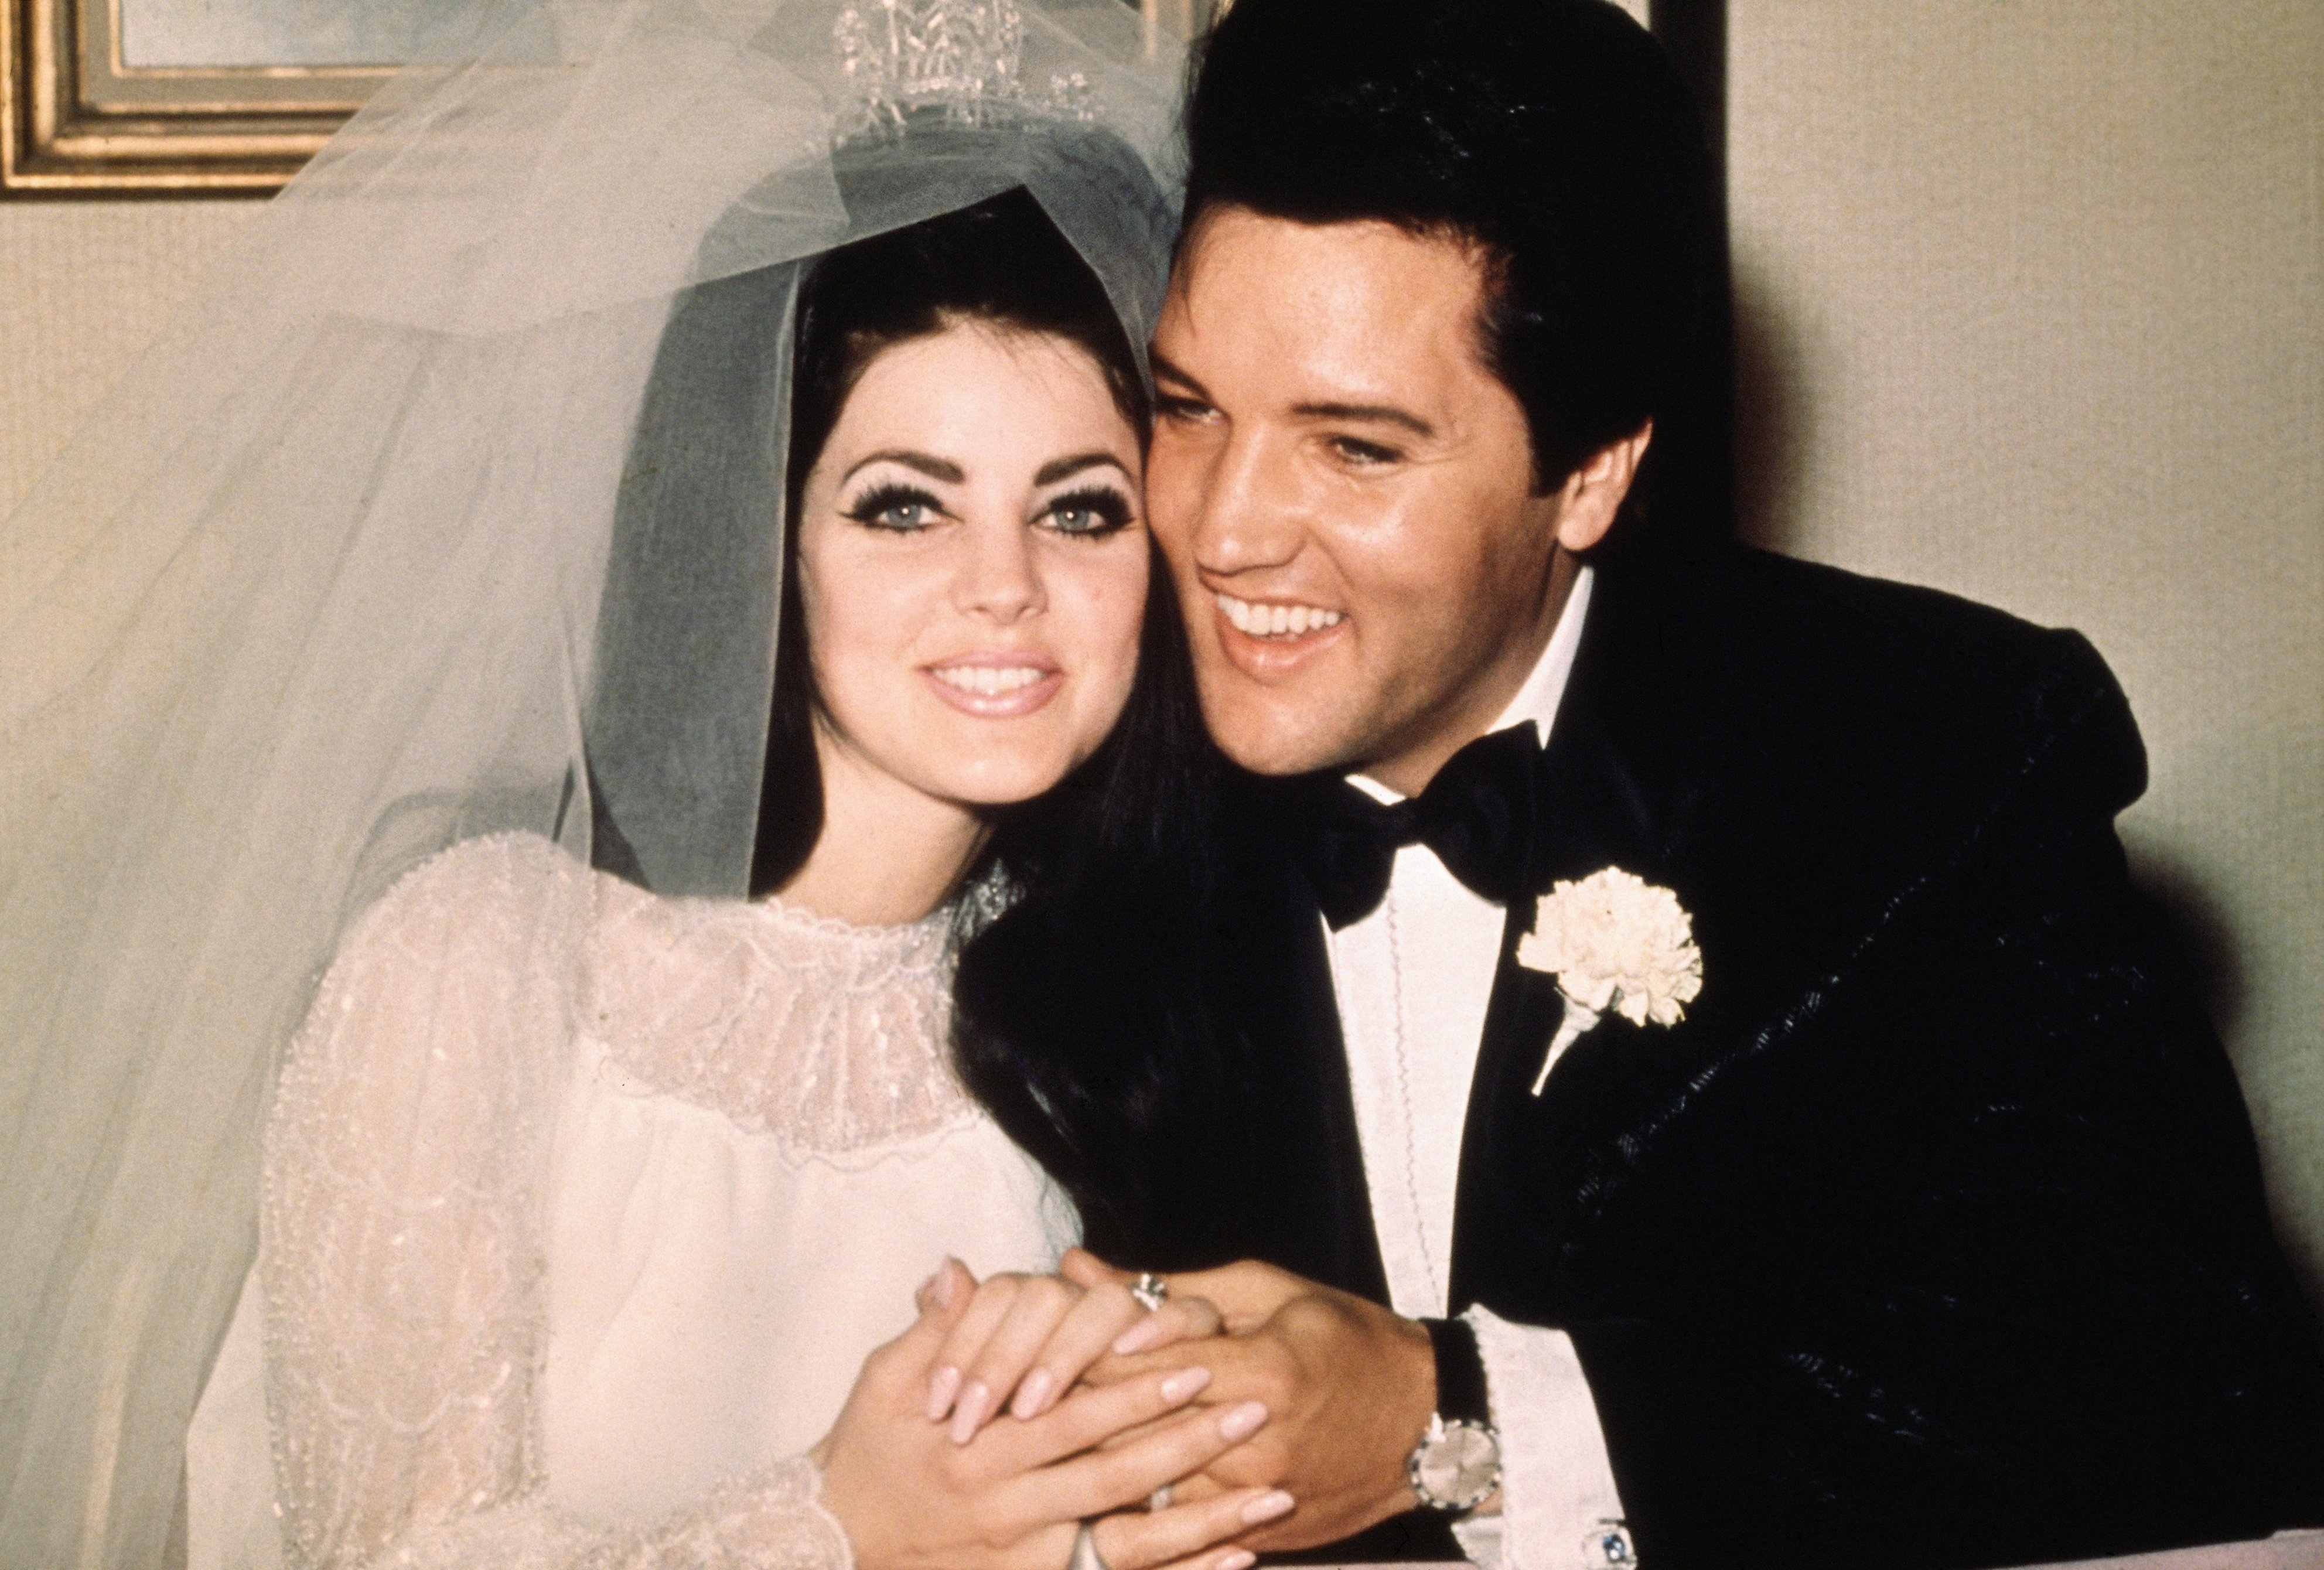 Elvis Presley and Priscilla Presley on their wedding day on May 1, 1967 | Source: Getty Images